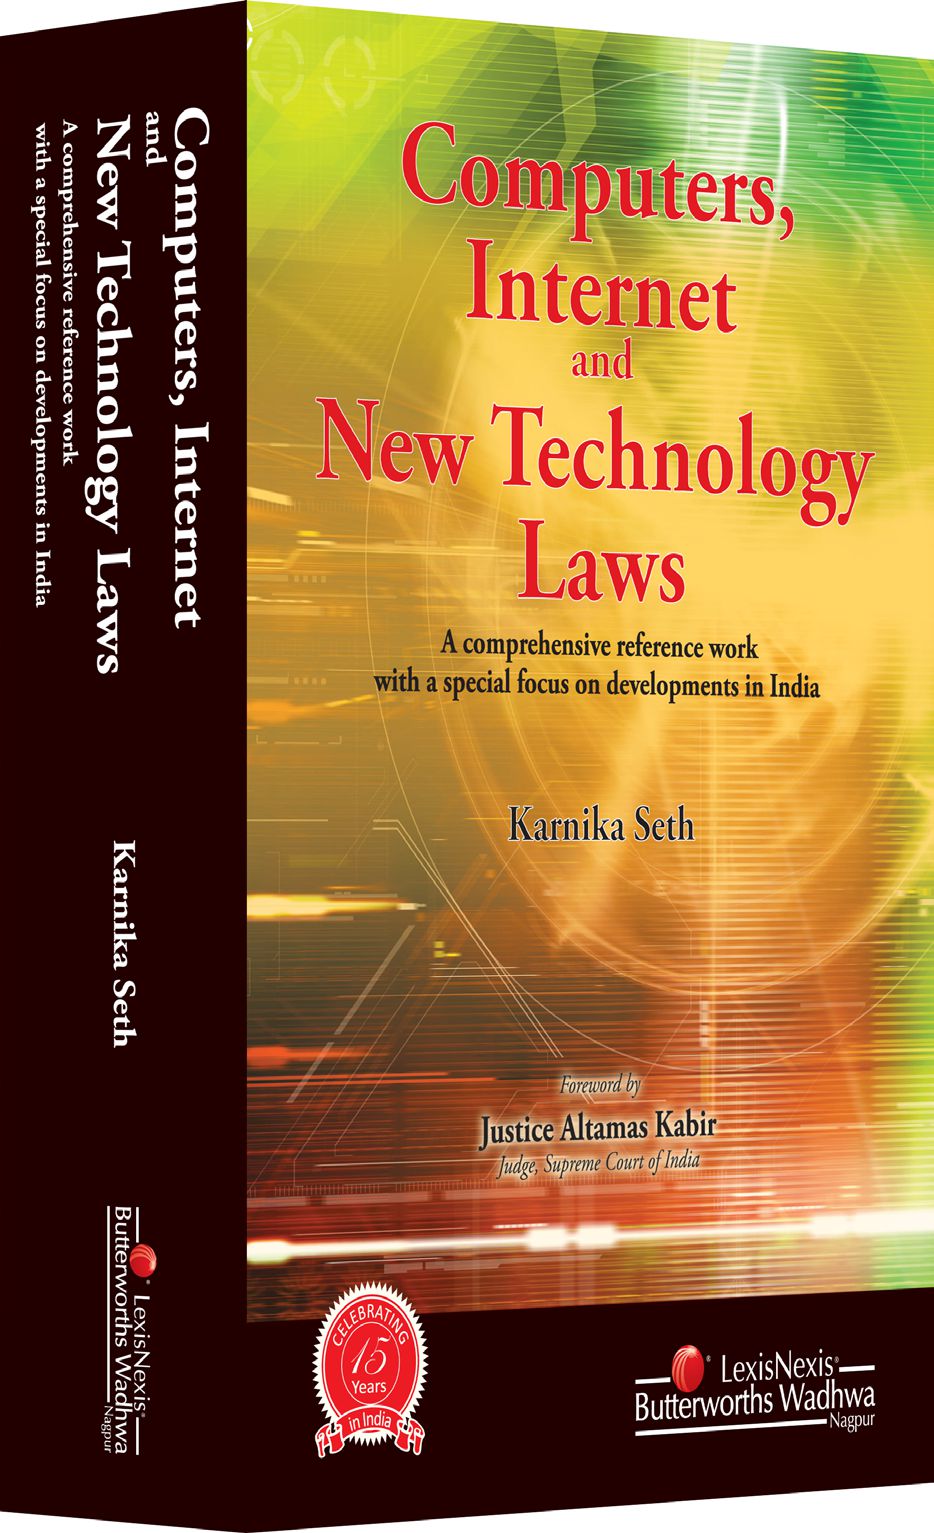 Computers, Internet & New Technology laws, Lexis Nexis 2012 Edition